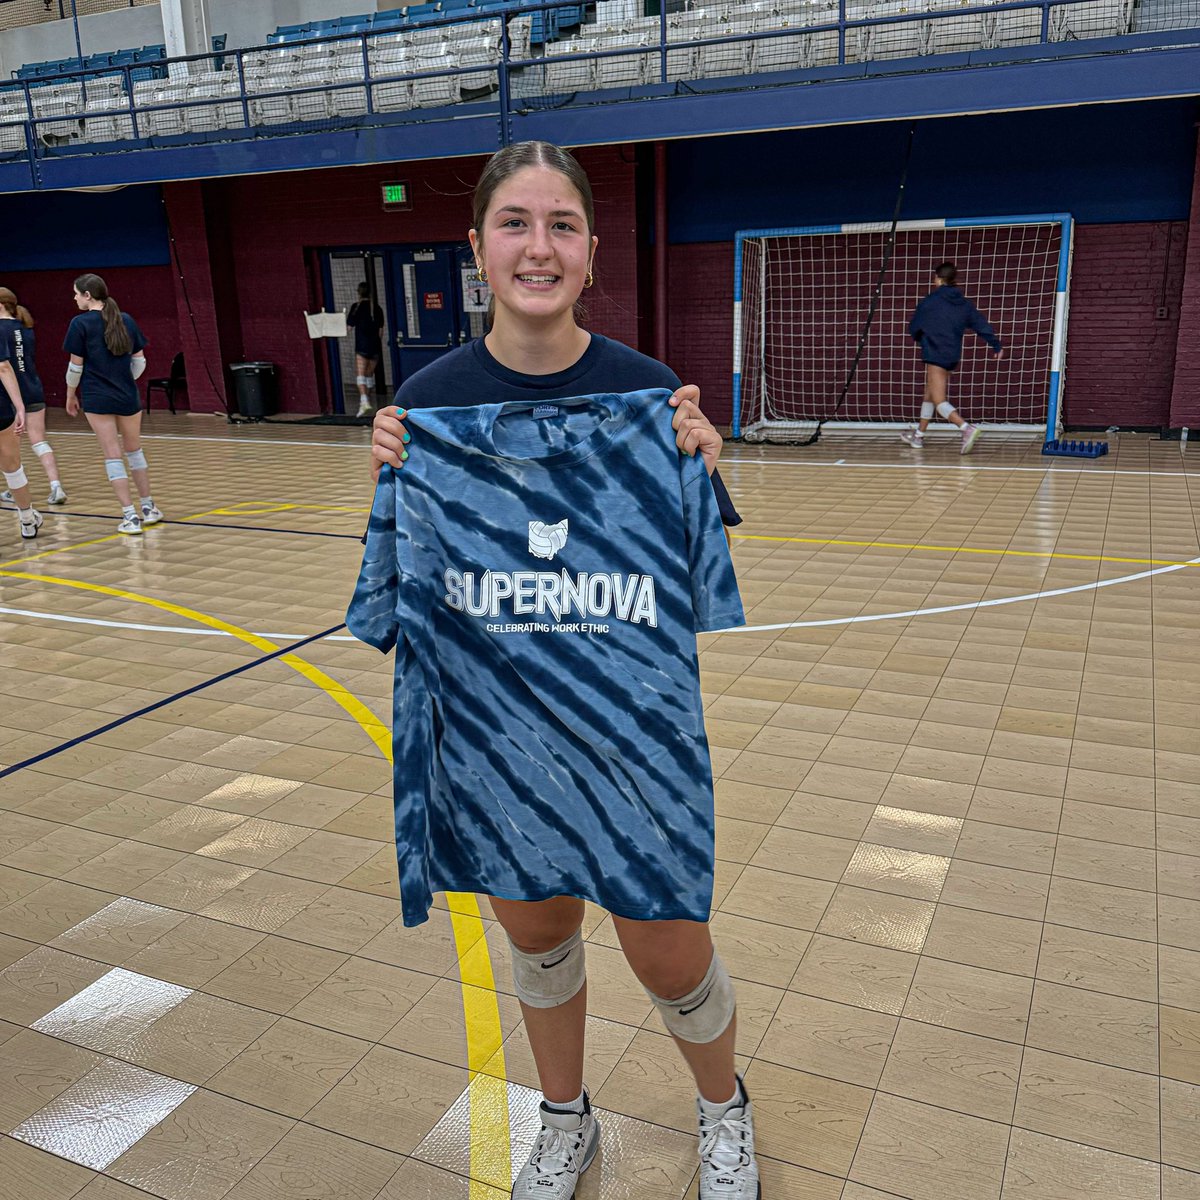 Introducing our SuperNOVA, Veronica Larson! From her game-changing skills to her unwavering dependability, Veronica has been a true asset to multiple teams. We’re incredibly lucky to have her in our club! #WTD #theNOVAway